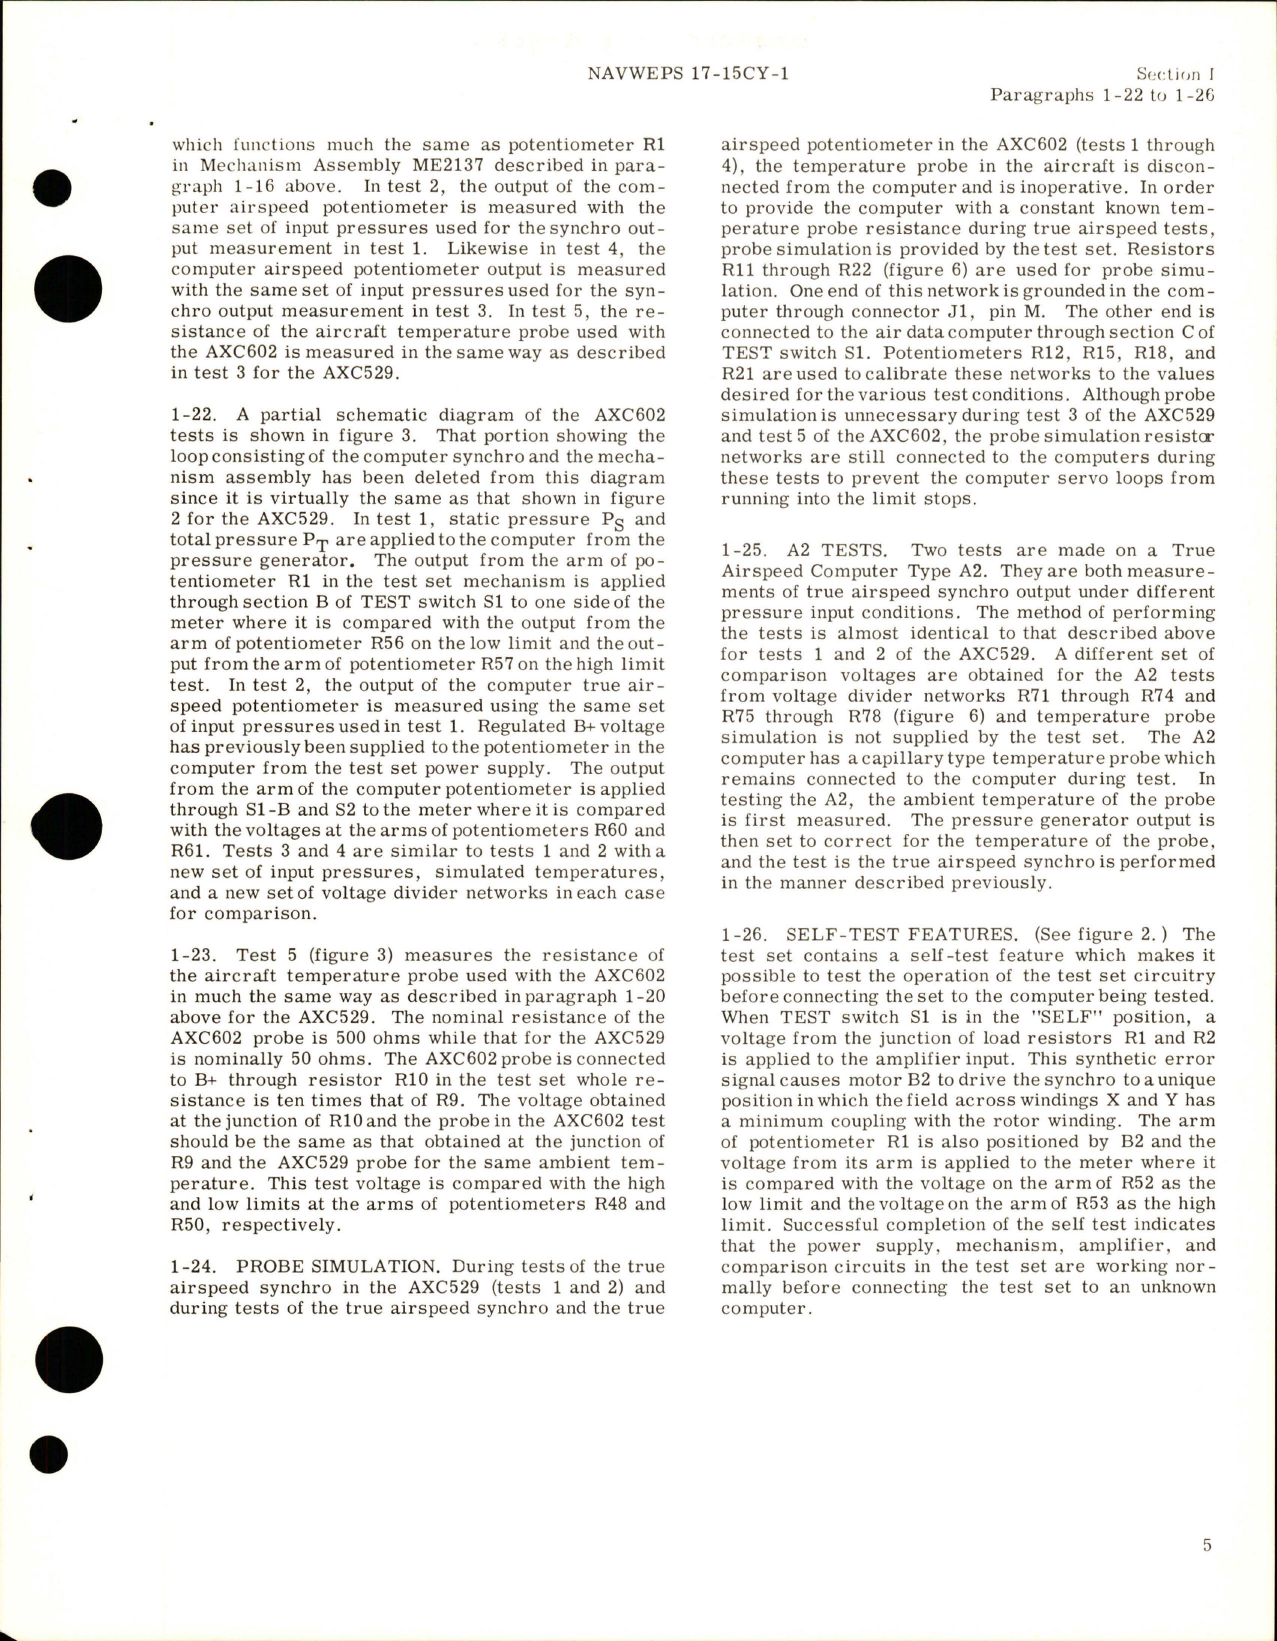 Sample page 9 from AirCorps Library document: Operation and Service Instructions with Illustrated Parts for True Airspeed Computer Test Set - Type WS2061 - Part 817306